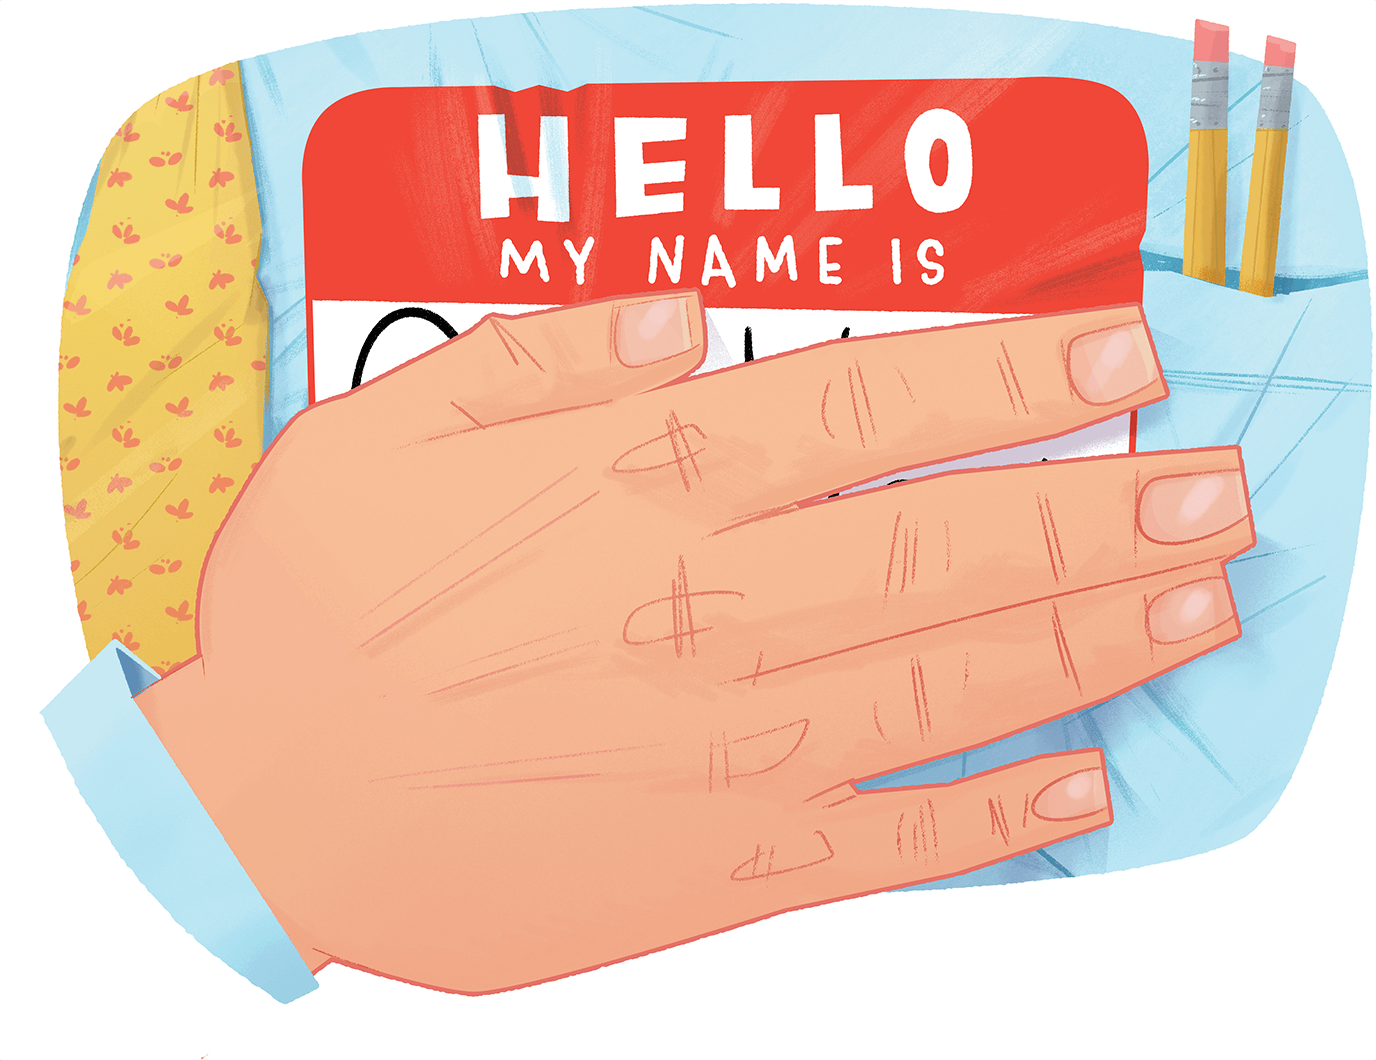 Illustration of hand covering name tag